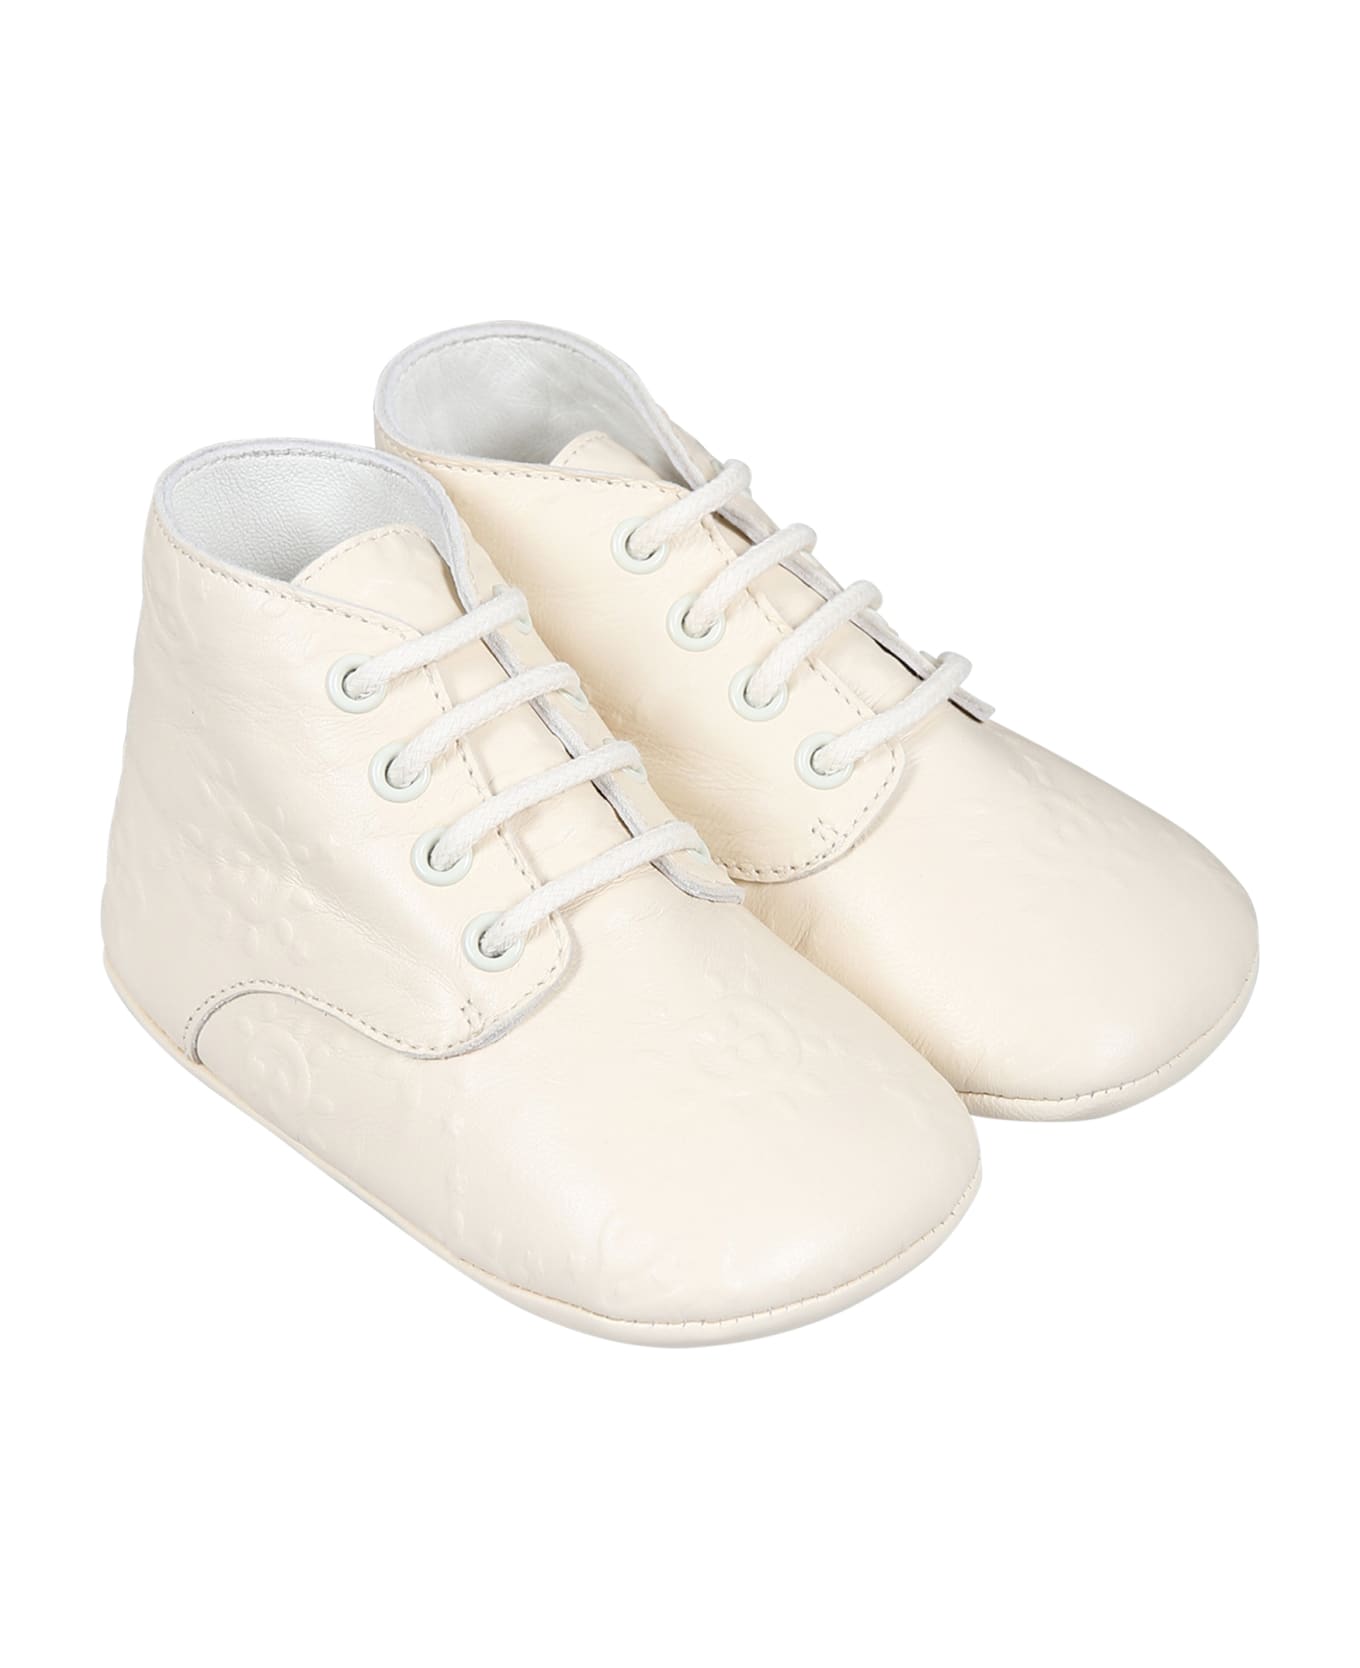 Gucci Ivory Shoes For Baby Kids With Gg Cross And Ufo - Ivory シューズ